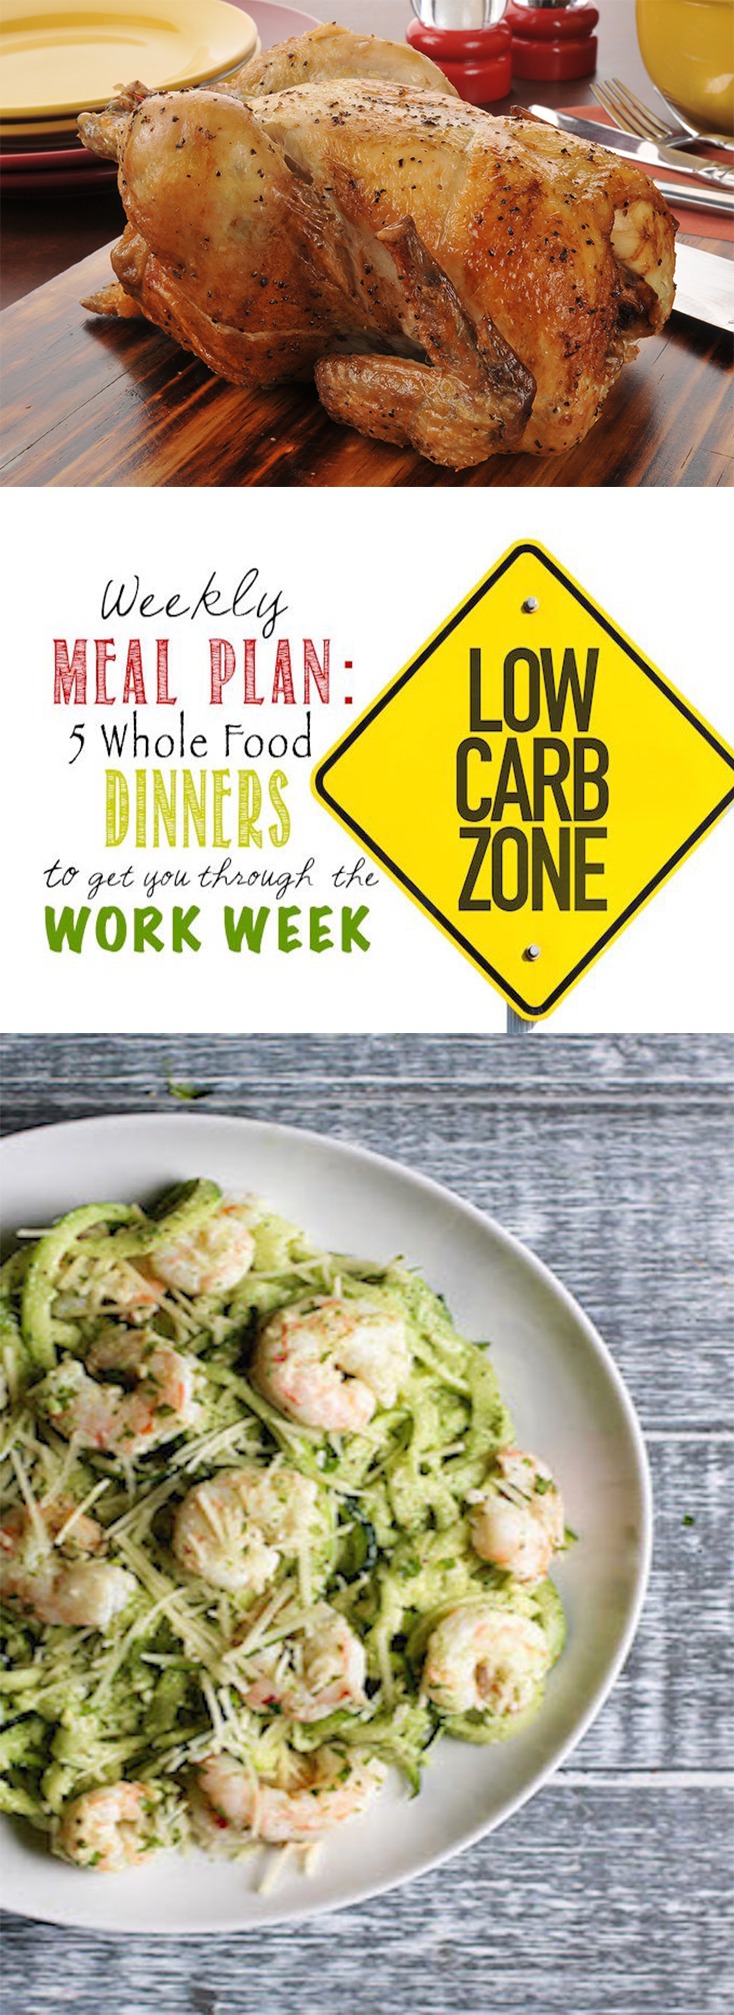 Pinterest Weekly Meal Plan - Zoodles